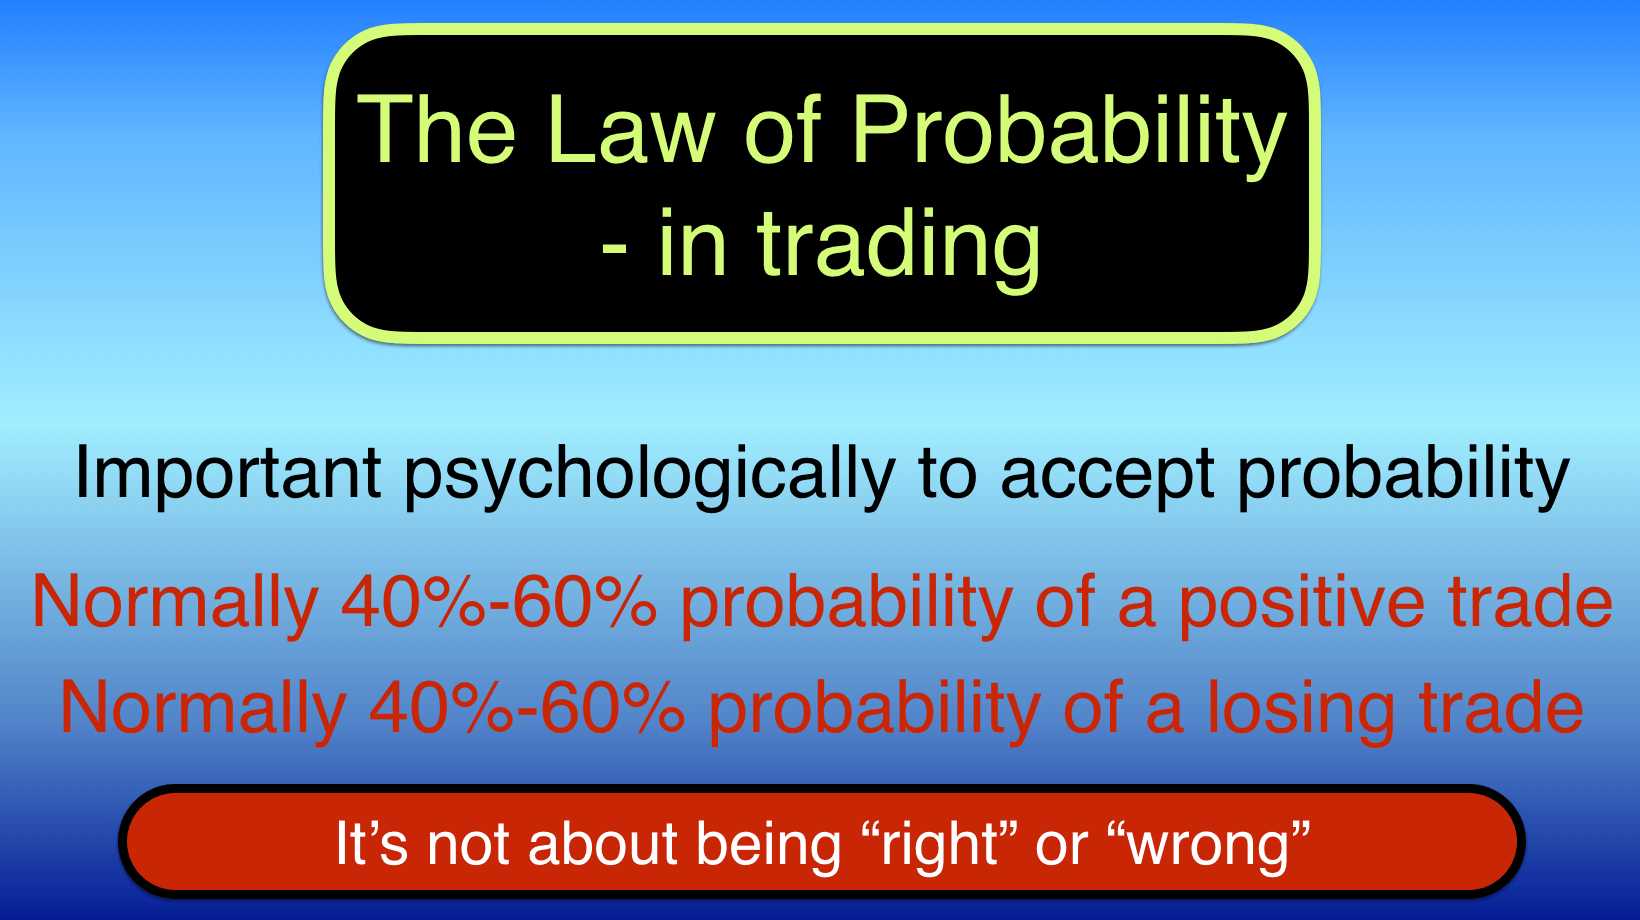 The law of probability in trading